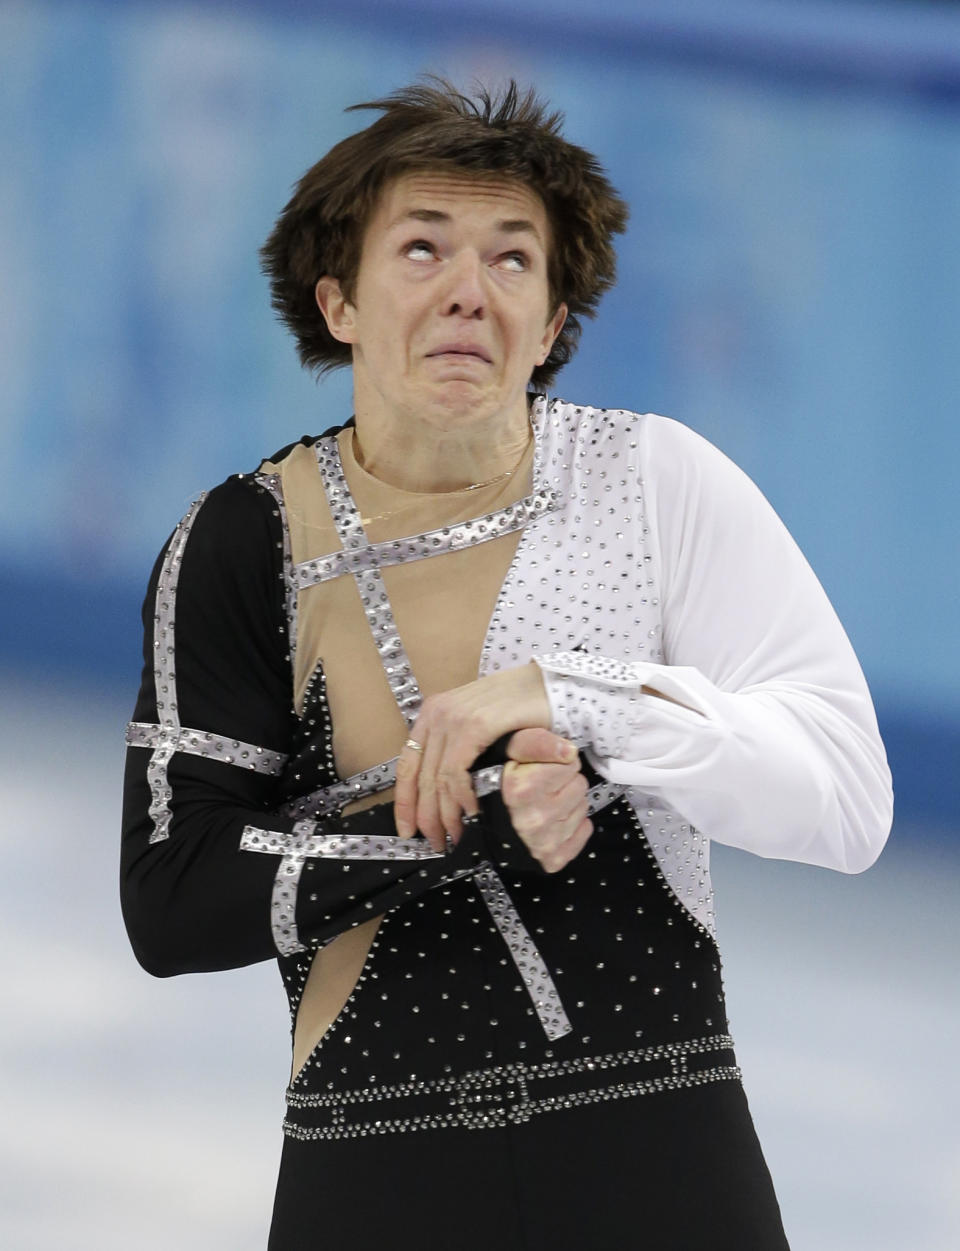 Yakov Godorozha of Ukraine competes in the men's short program figure skating competition at the Iceberg Skating Palace during the 2014 Winter Olympics, Thursday, Feb. 13, 2014, in Sochi, Russia. (AP Photo/Darron Cummings)